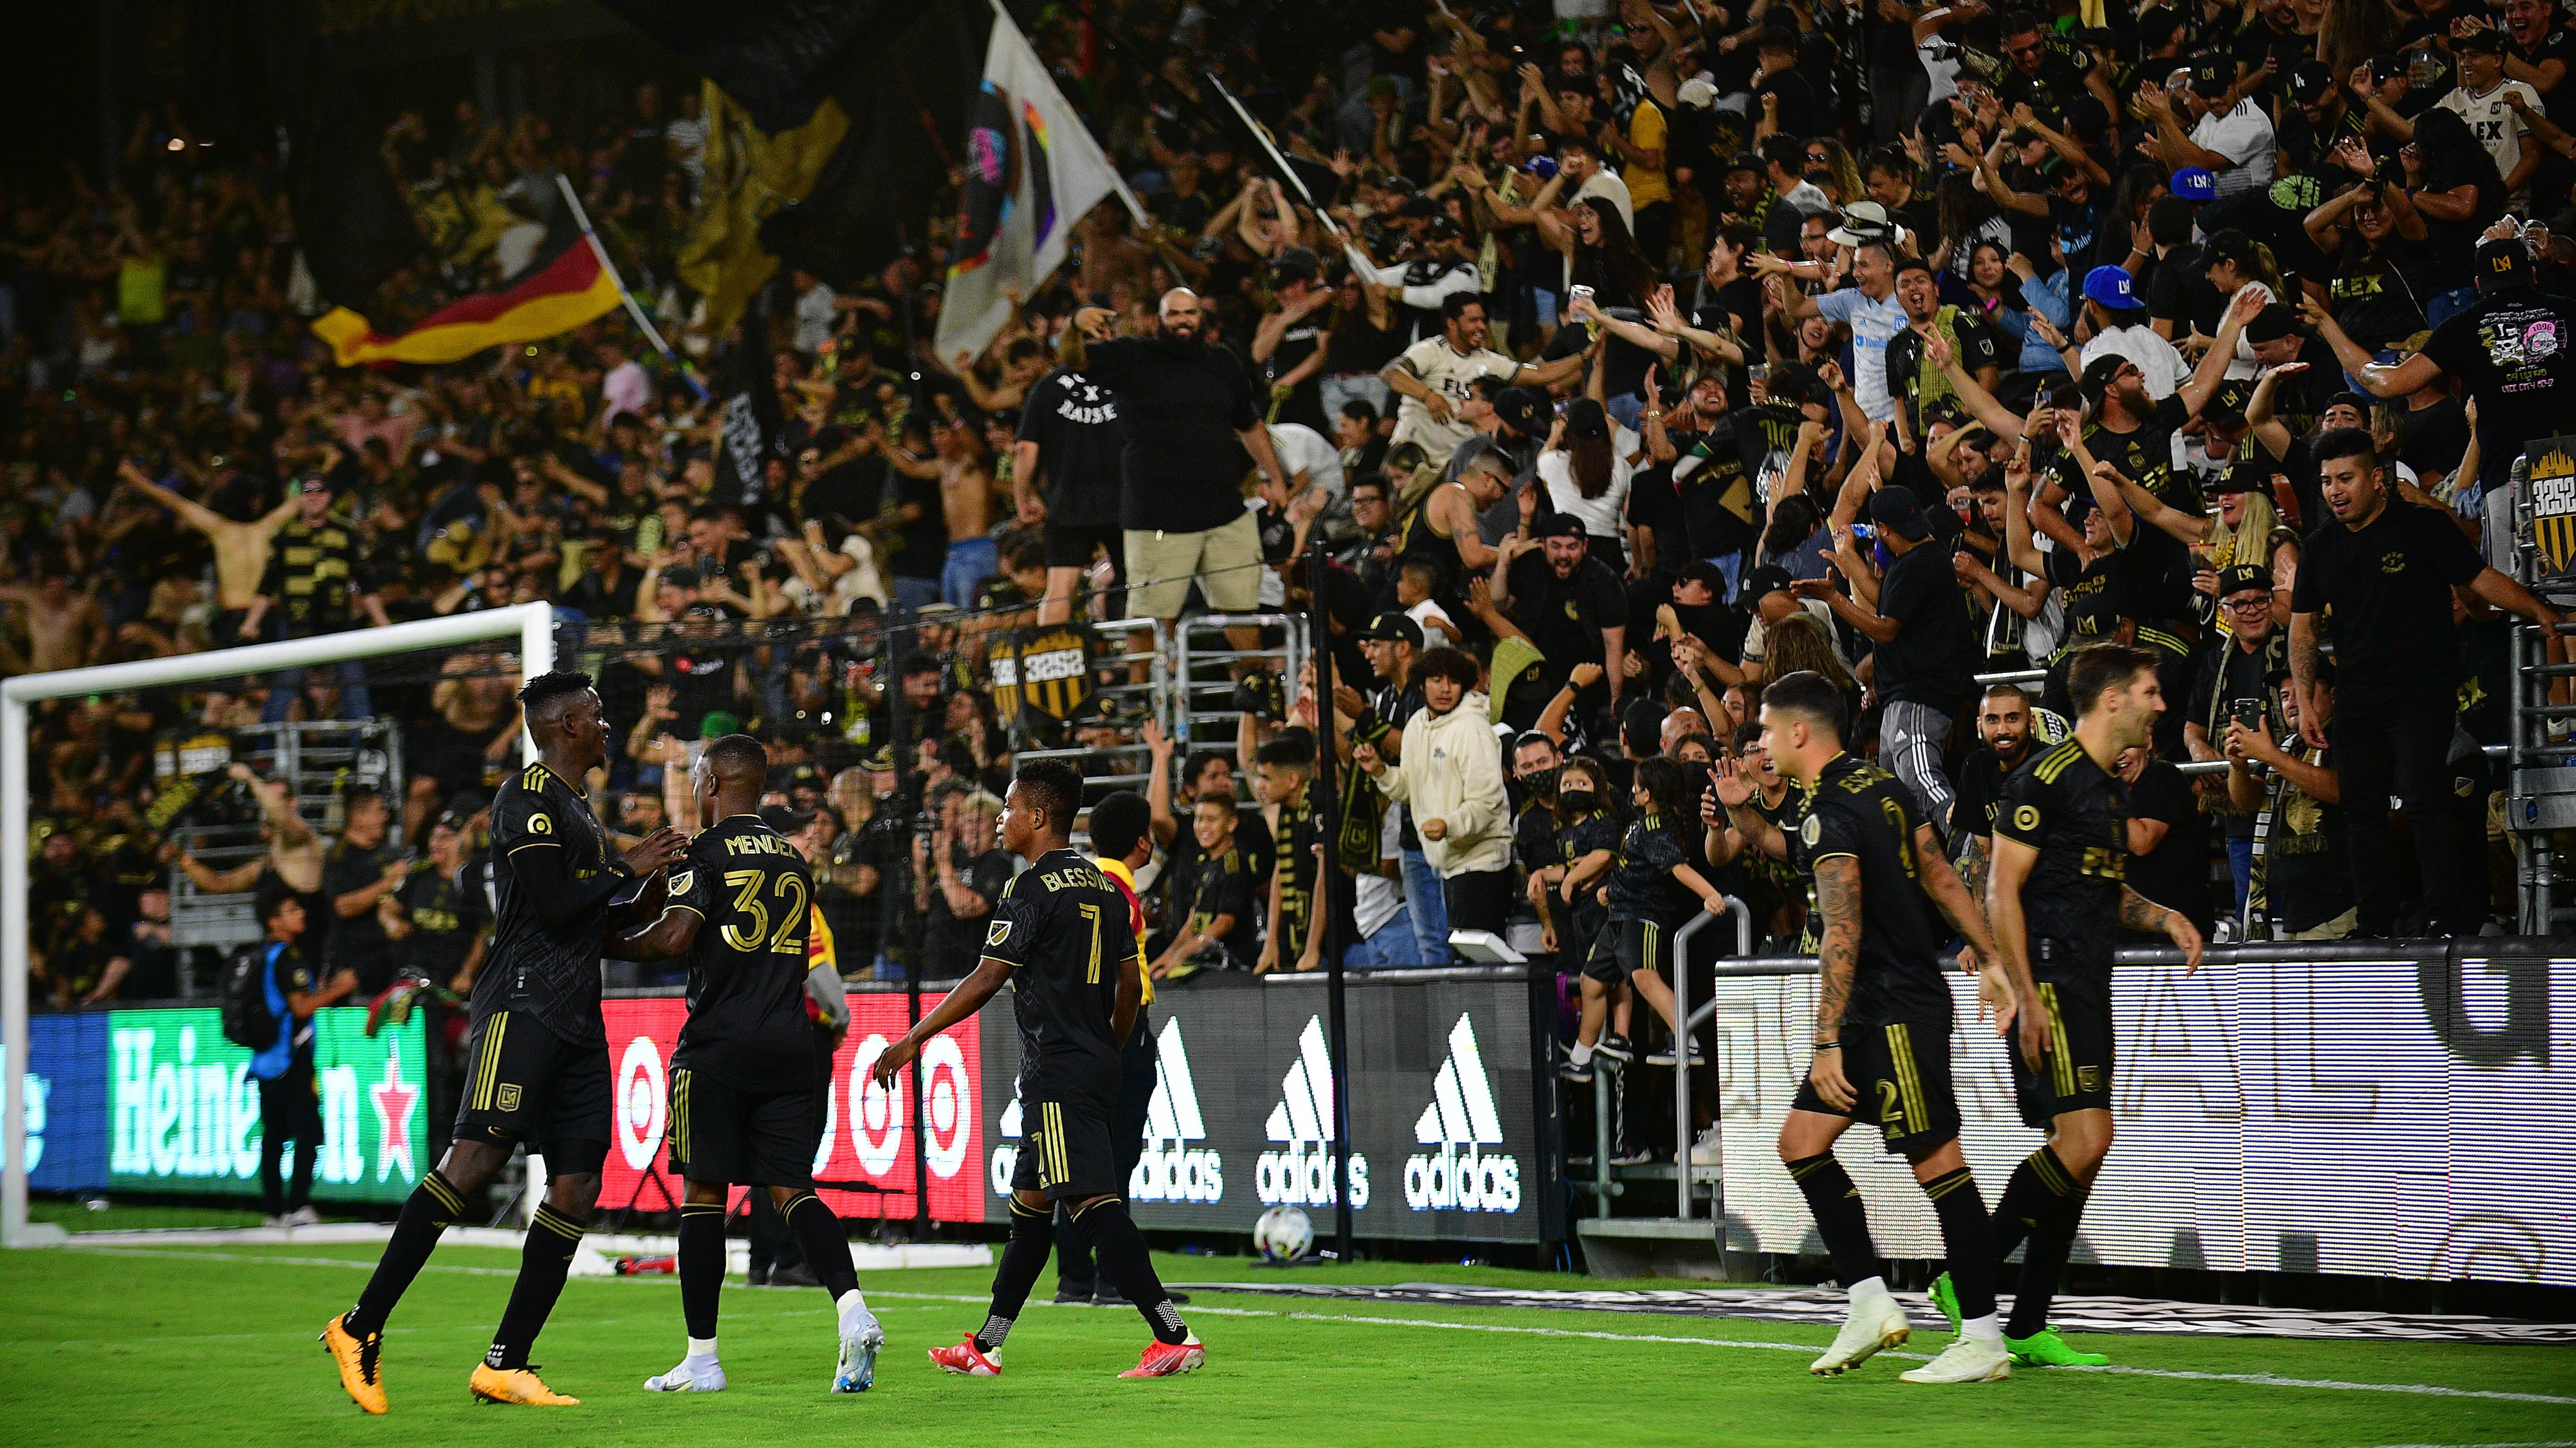 LAFC remain on record-setting Shield pace despite “target on our back”